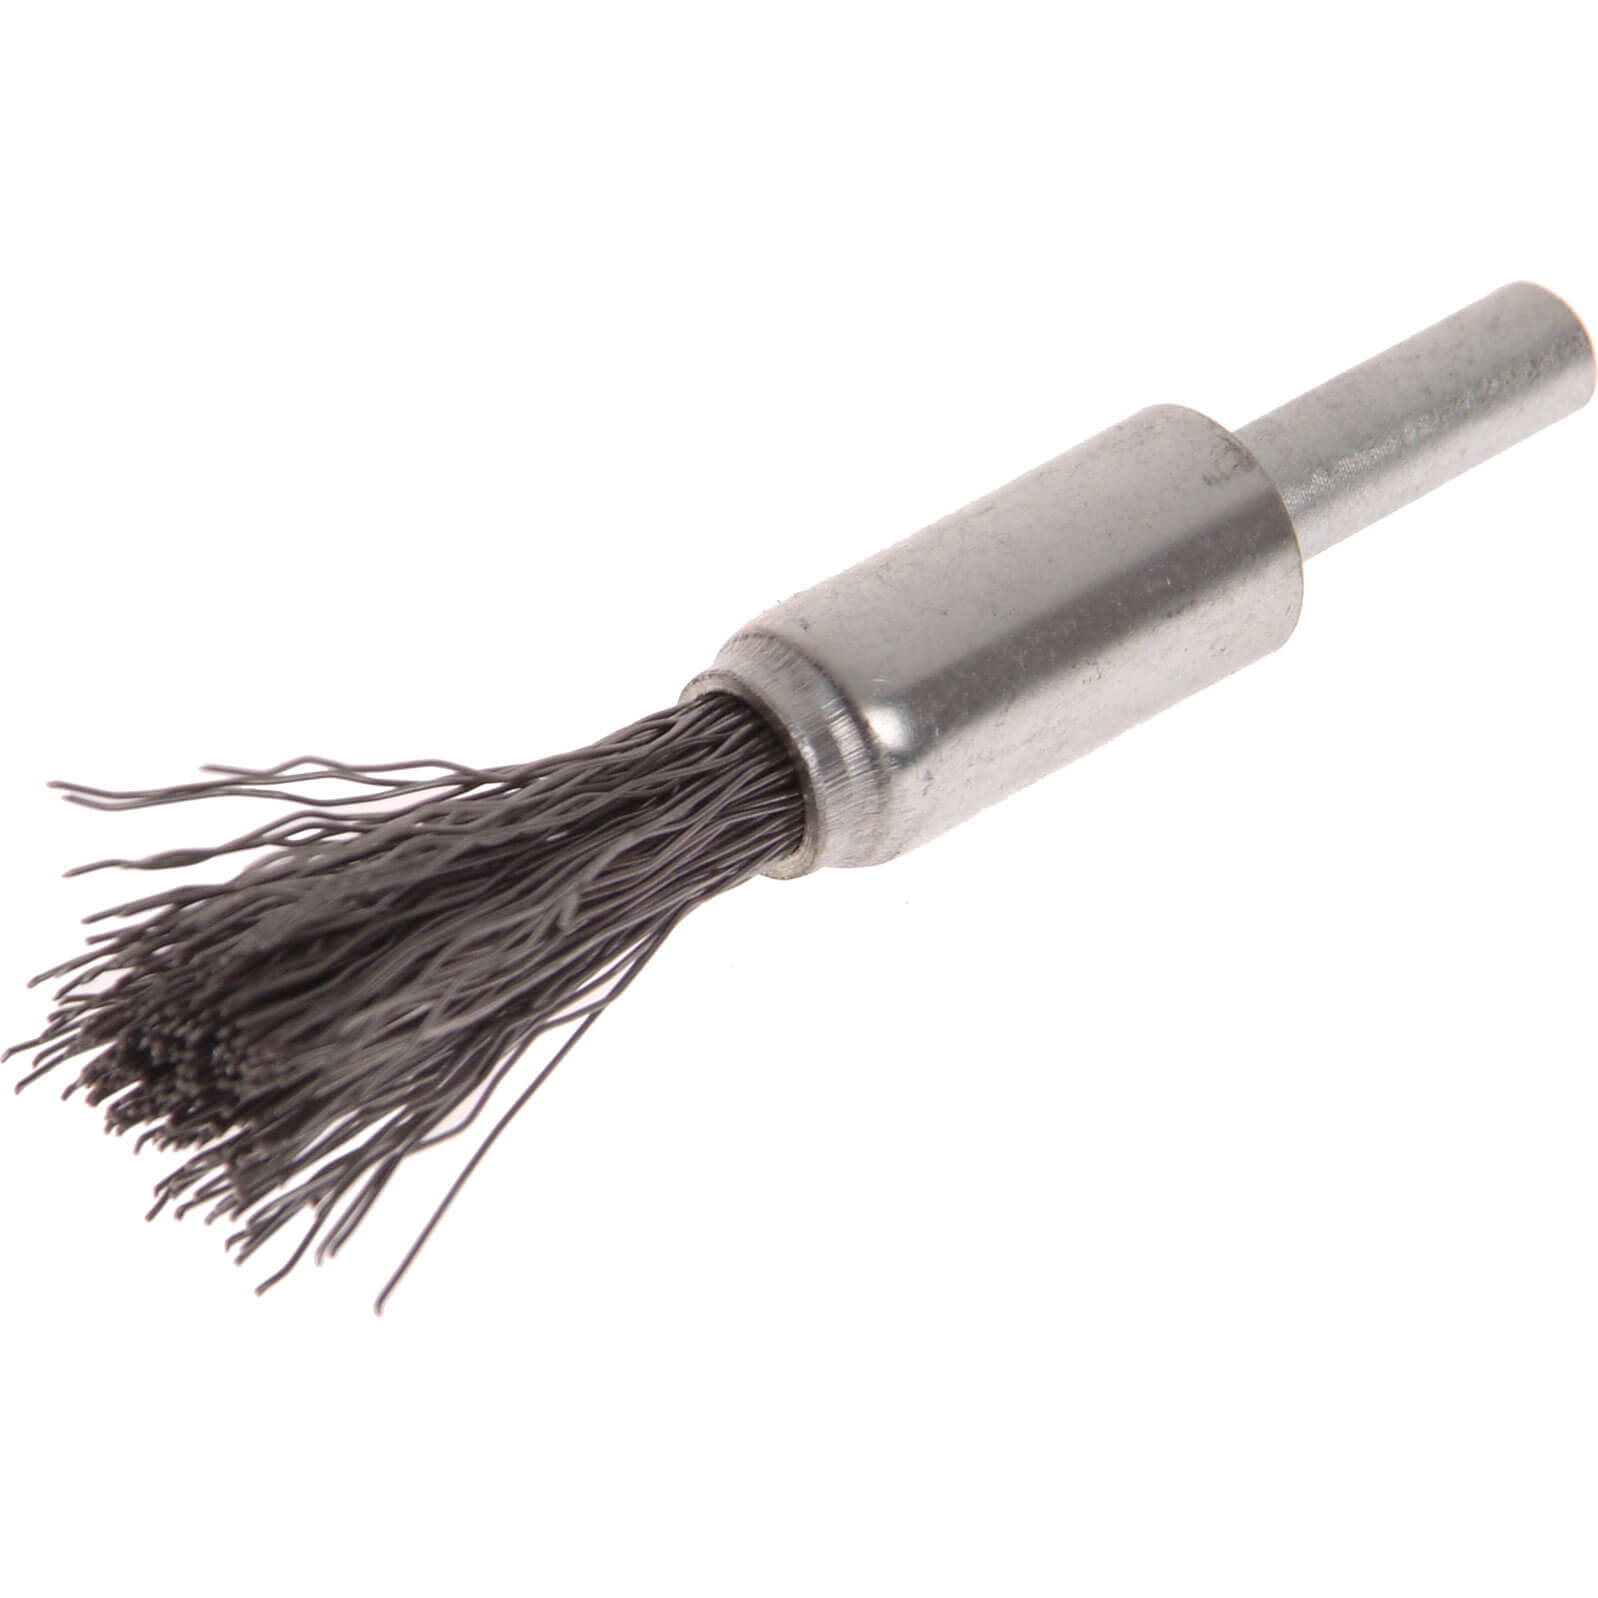 Image of Faithfull Flat End Crimped Wire Brush 12mm 6mm Shank